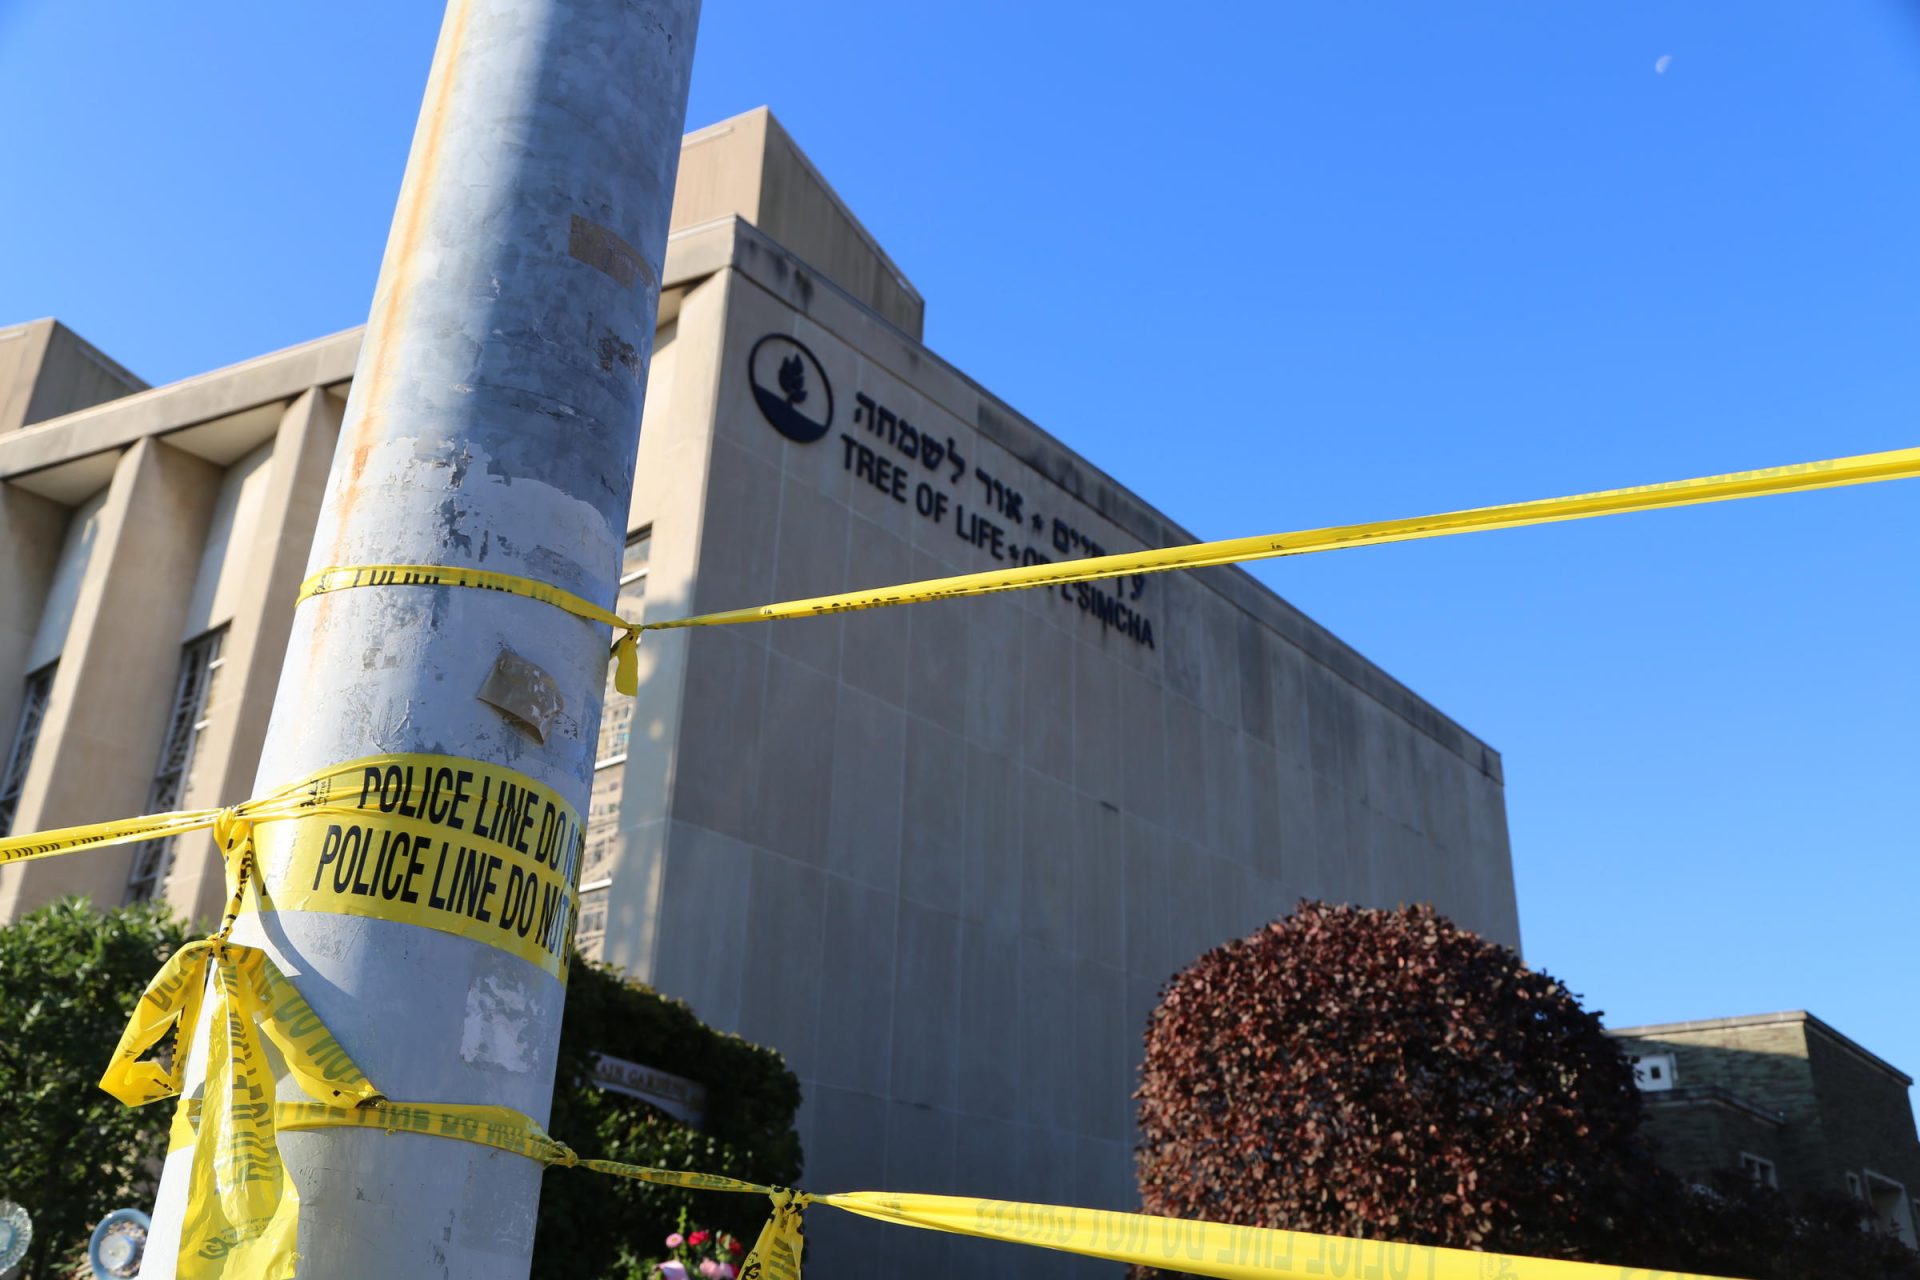 In this file photo, police tape surrounds the Tree of Life synagogue in Pittsburgh.